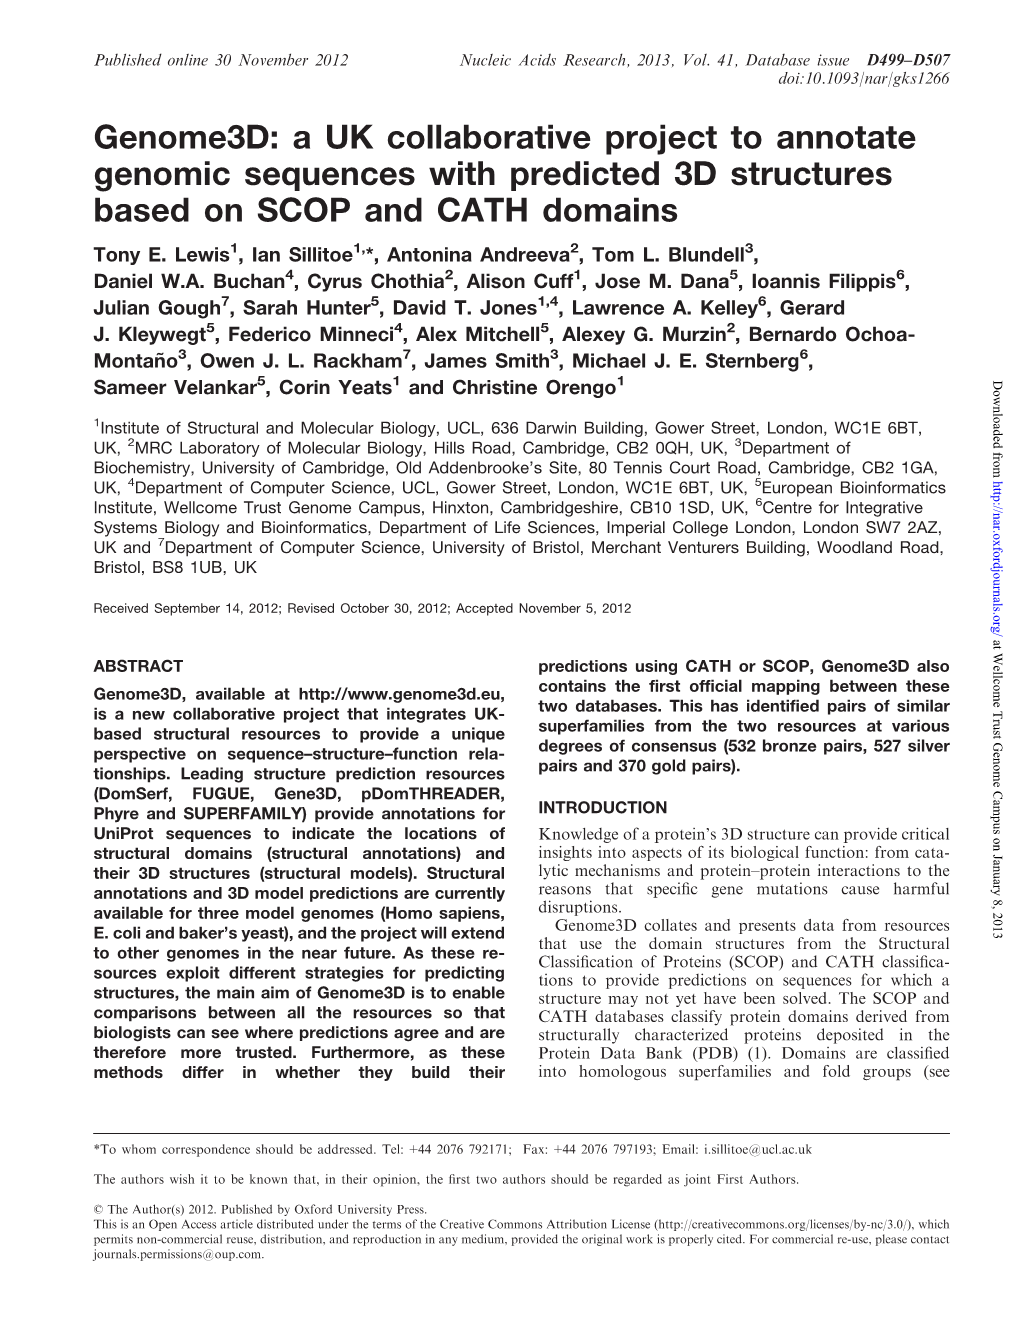 A UK Collaborative Project to Annotate Genomic Sequences with Predicted 3D Structures Based on SCOP and CATH Domains Tony E